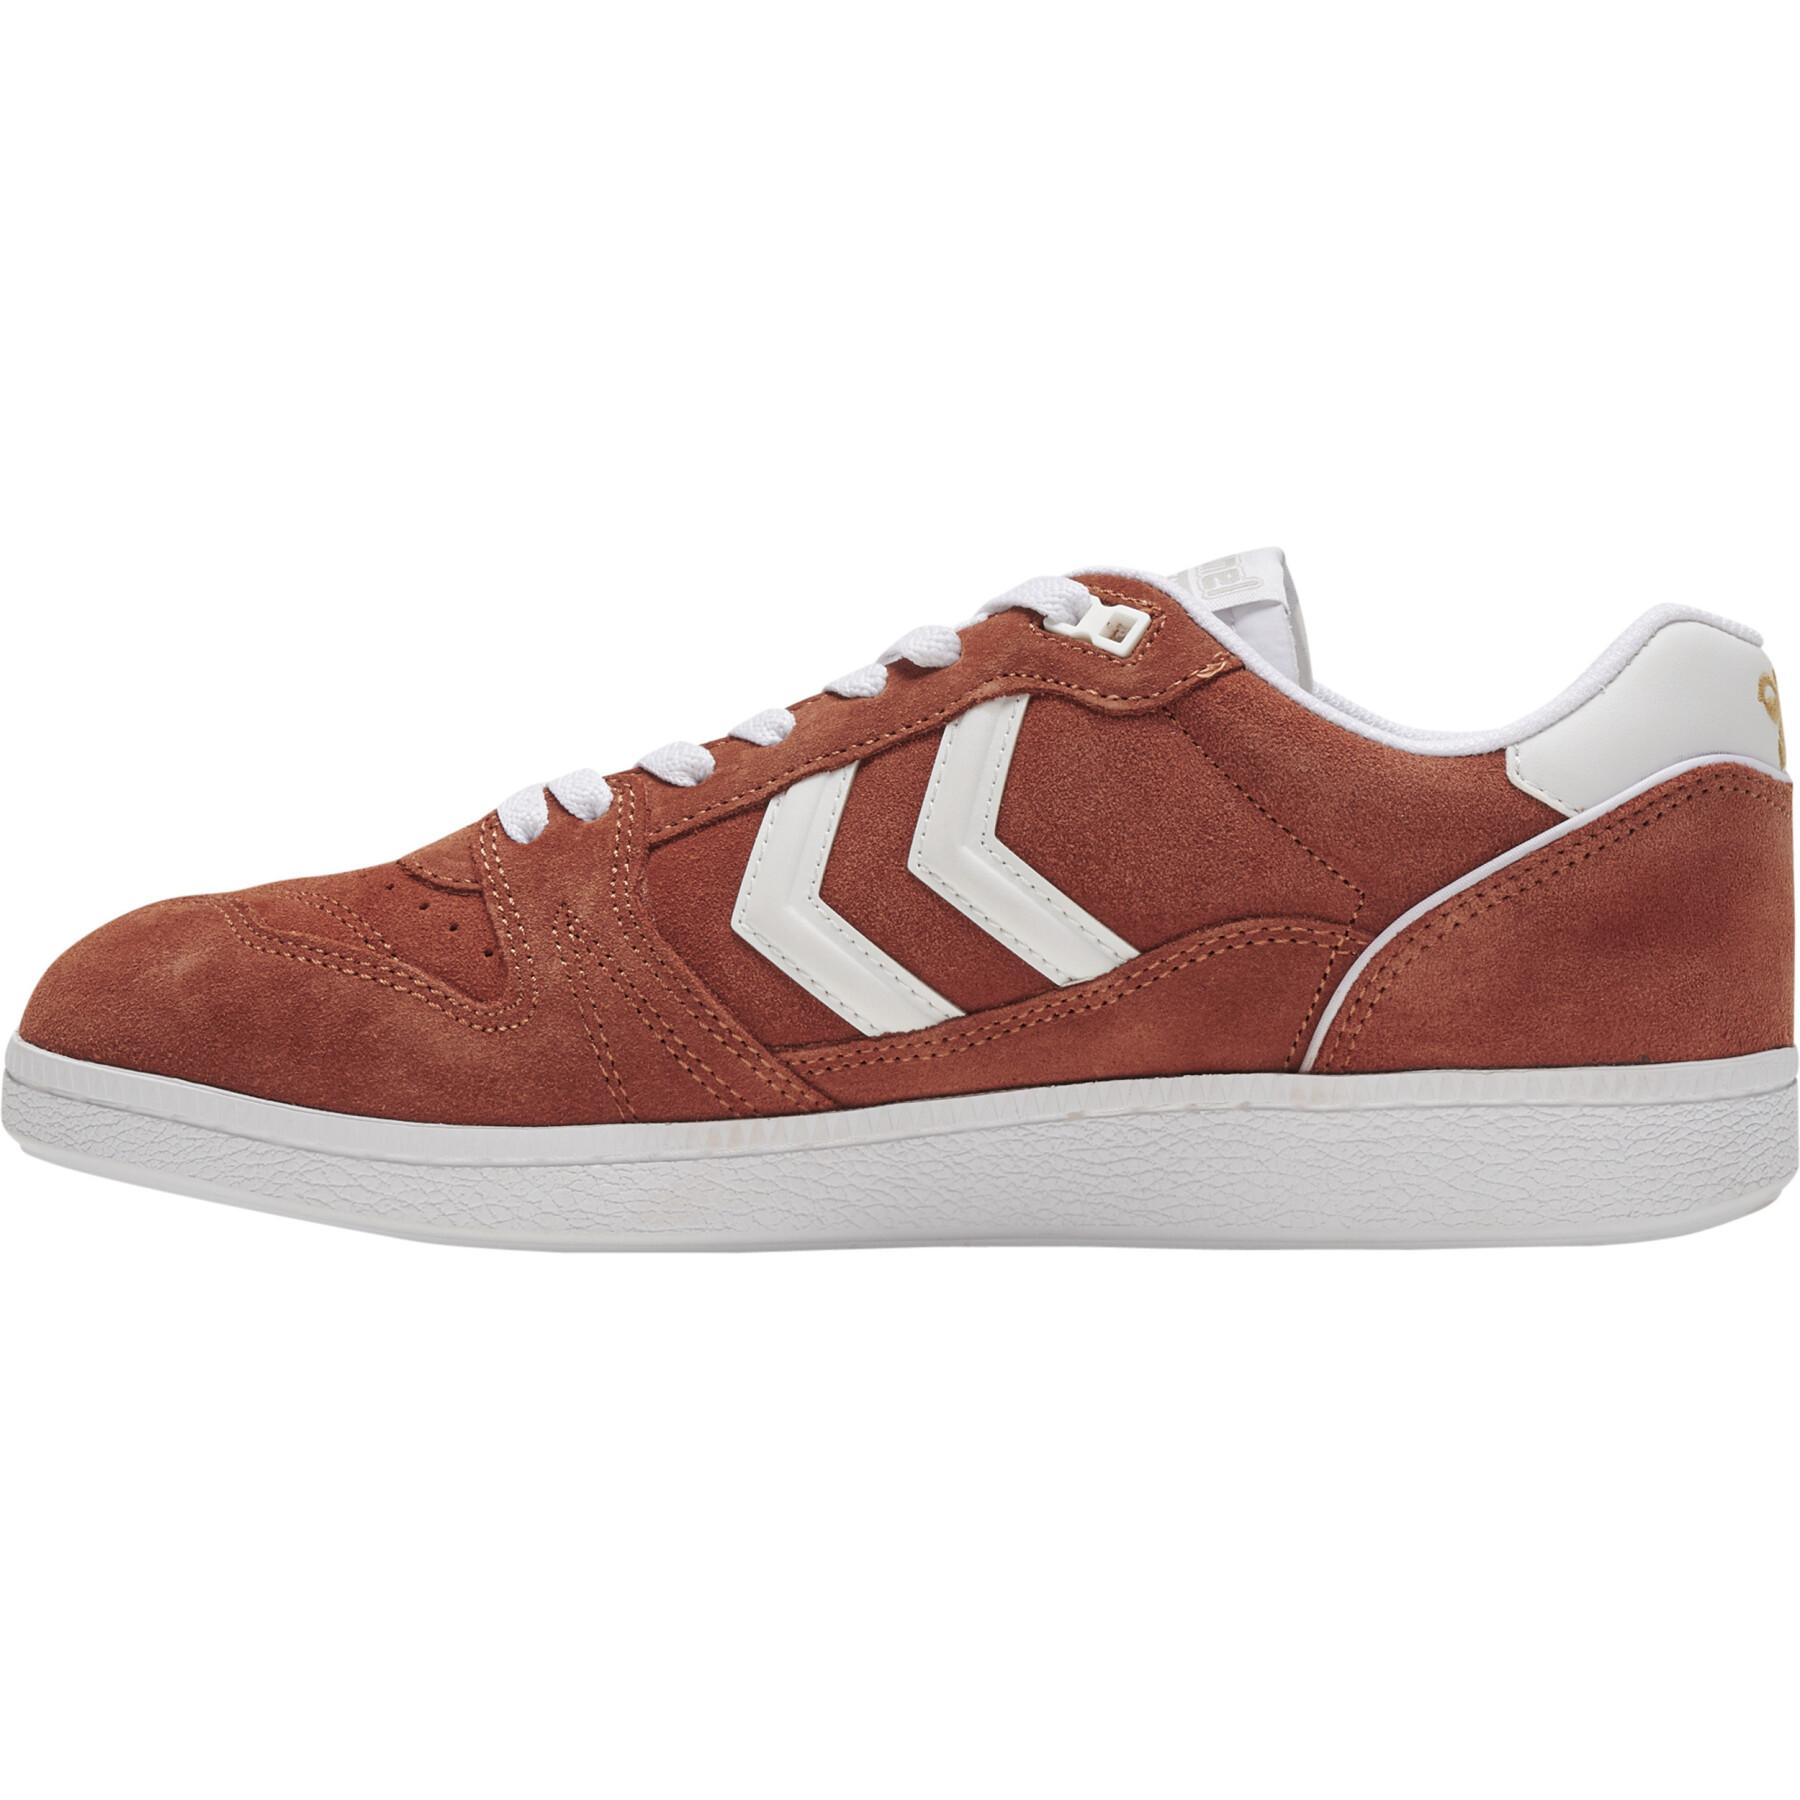 Trainers Hummel Hb Team Suede